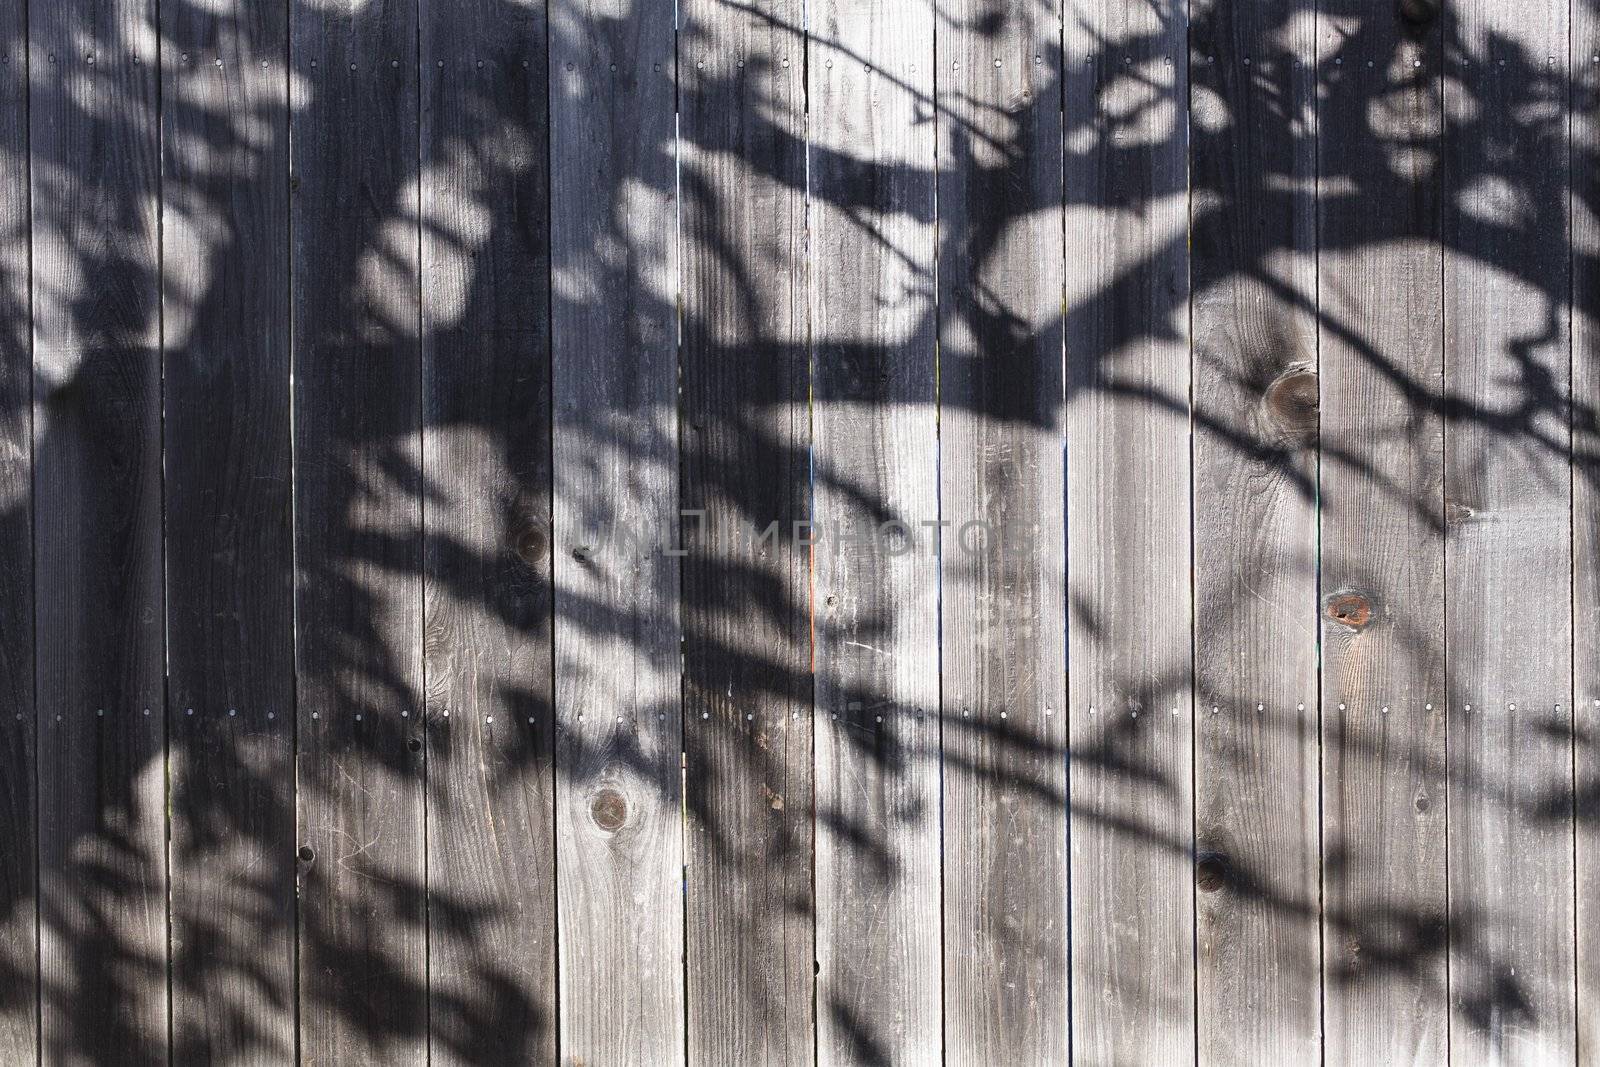 Backyard Wooden Fence With Shadow Across it of Branches With Leaves